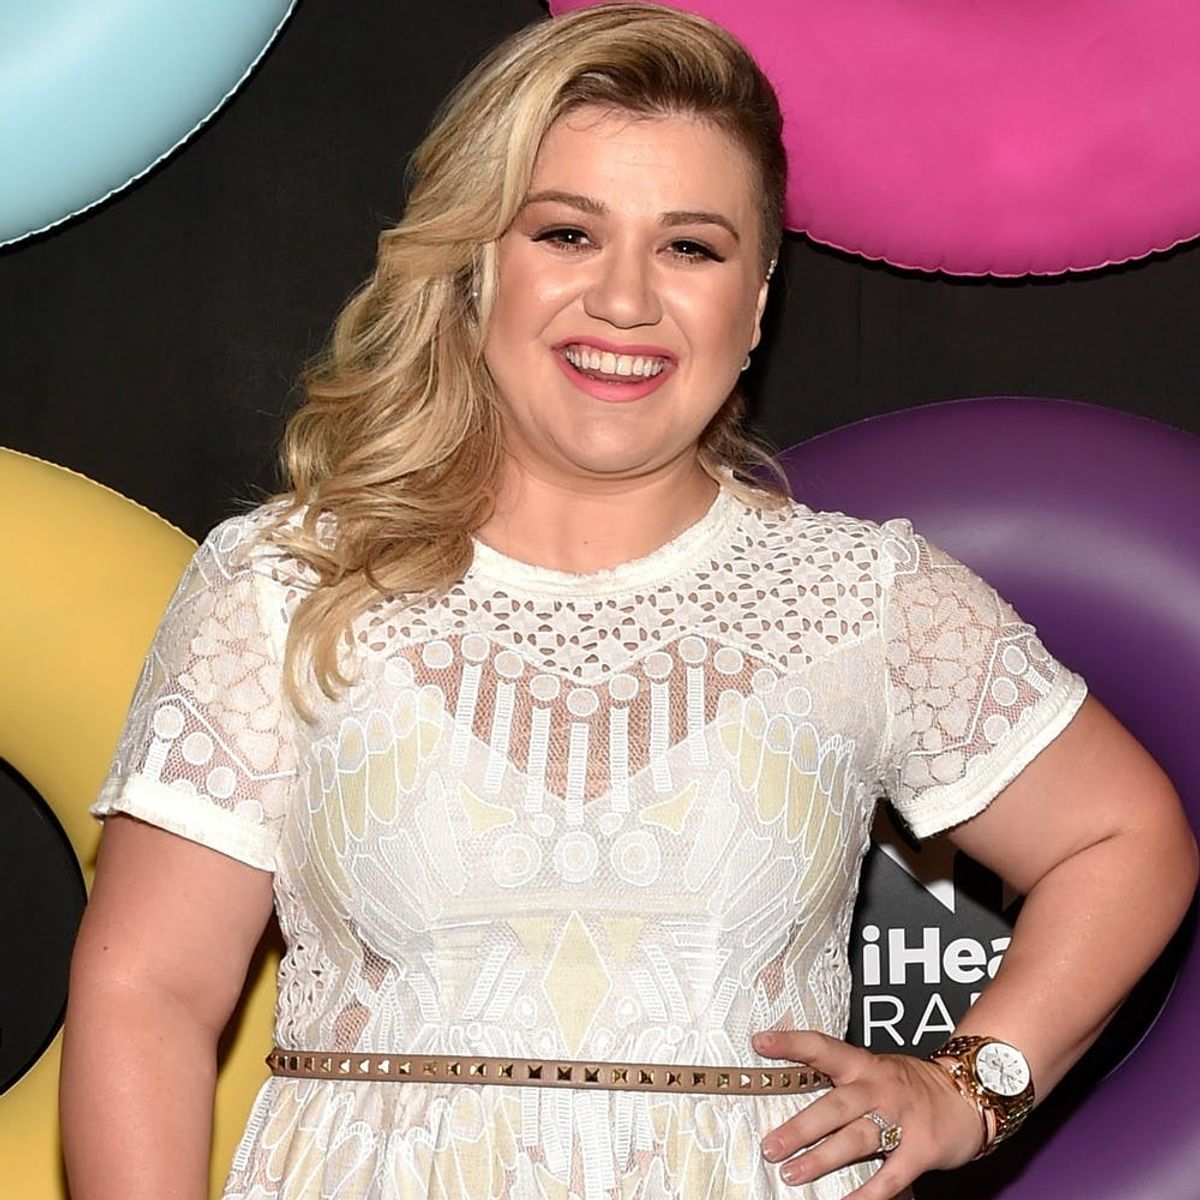 The First Pics of Kelly Clarkson’s Baby Boy Remy Are the Absolute Sweetest